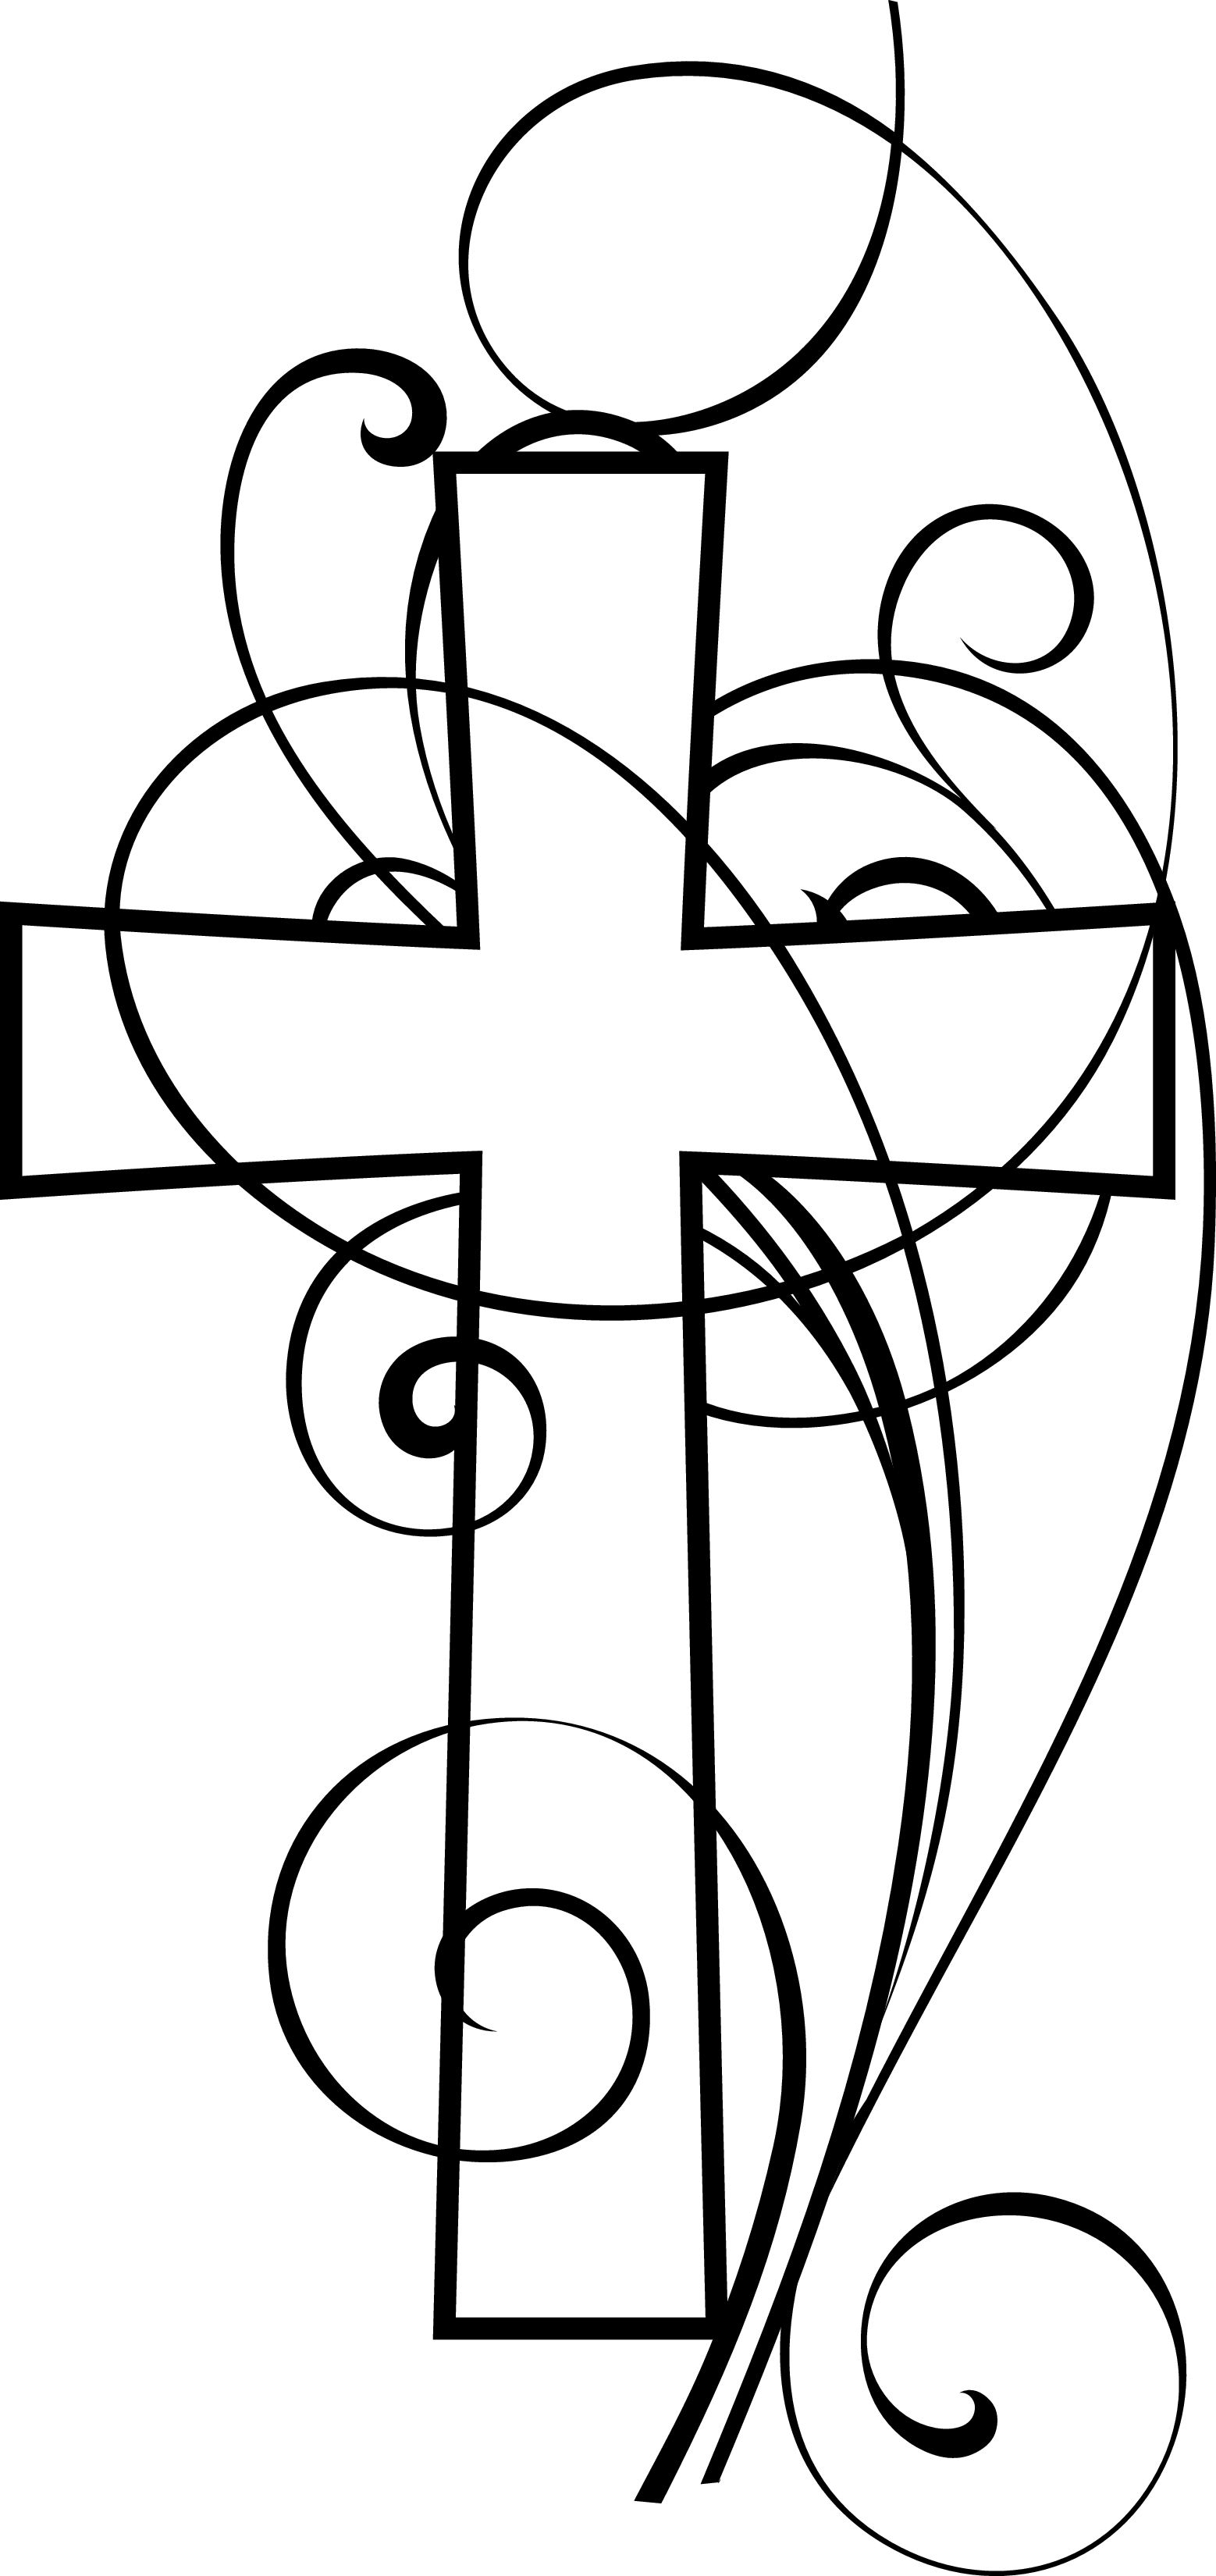 christian cliparts u0026middo - Free Clipart Of Crosses